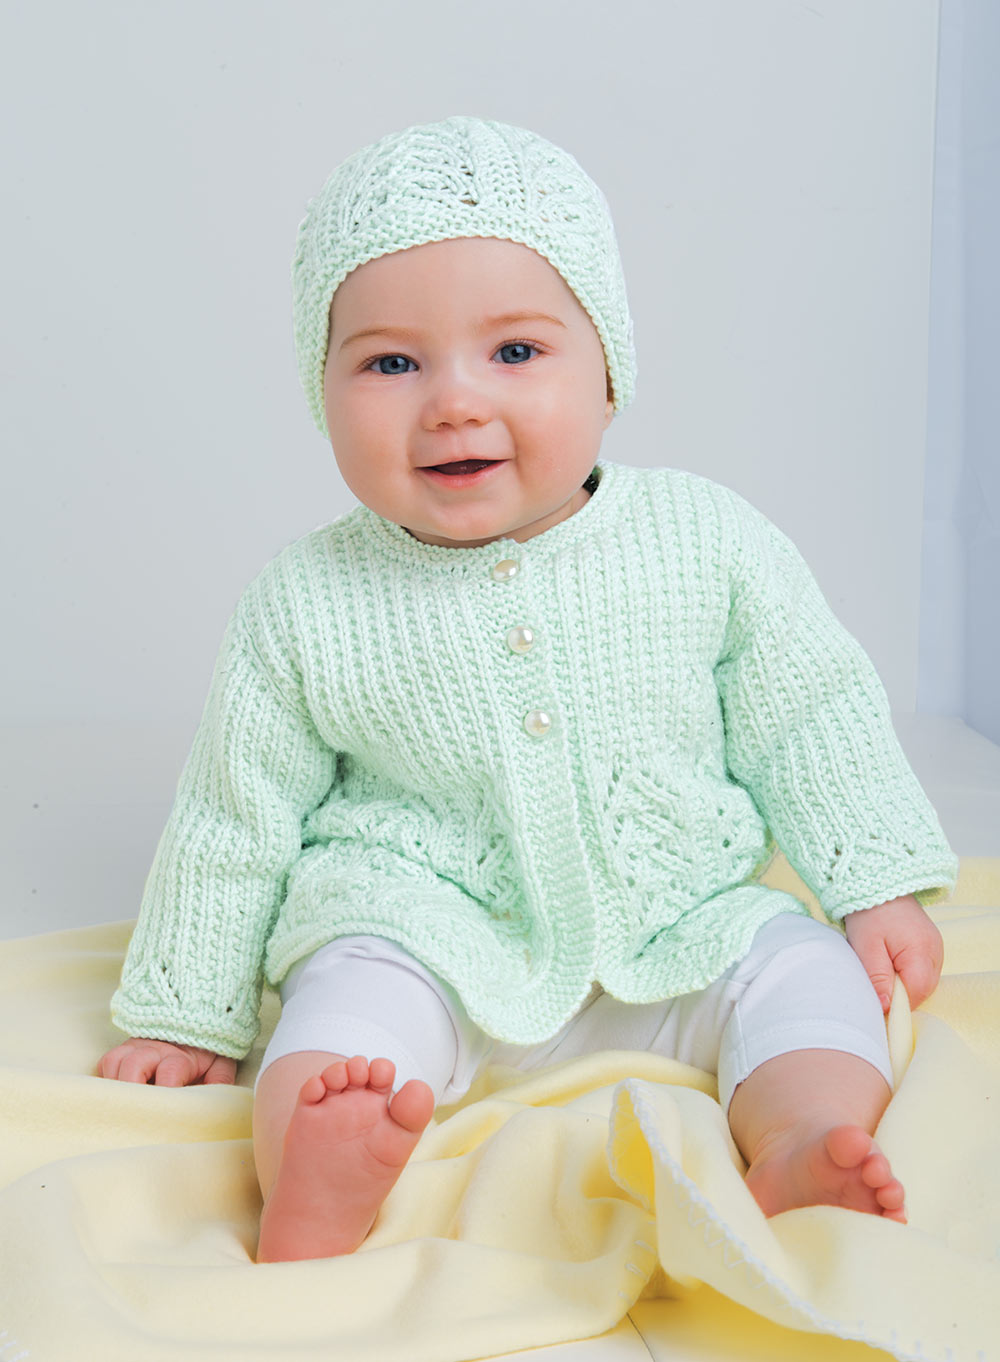 Baby's Lace Jacket and Hat Pattern